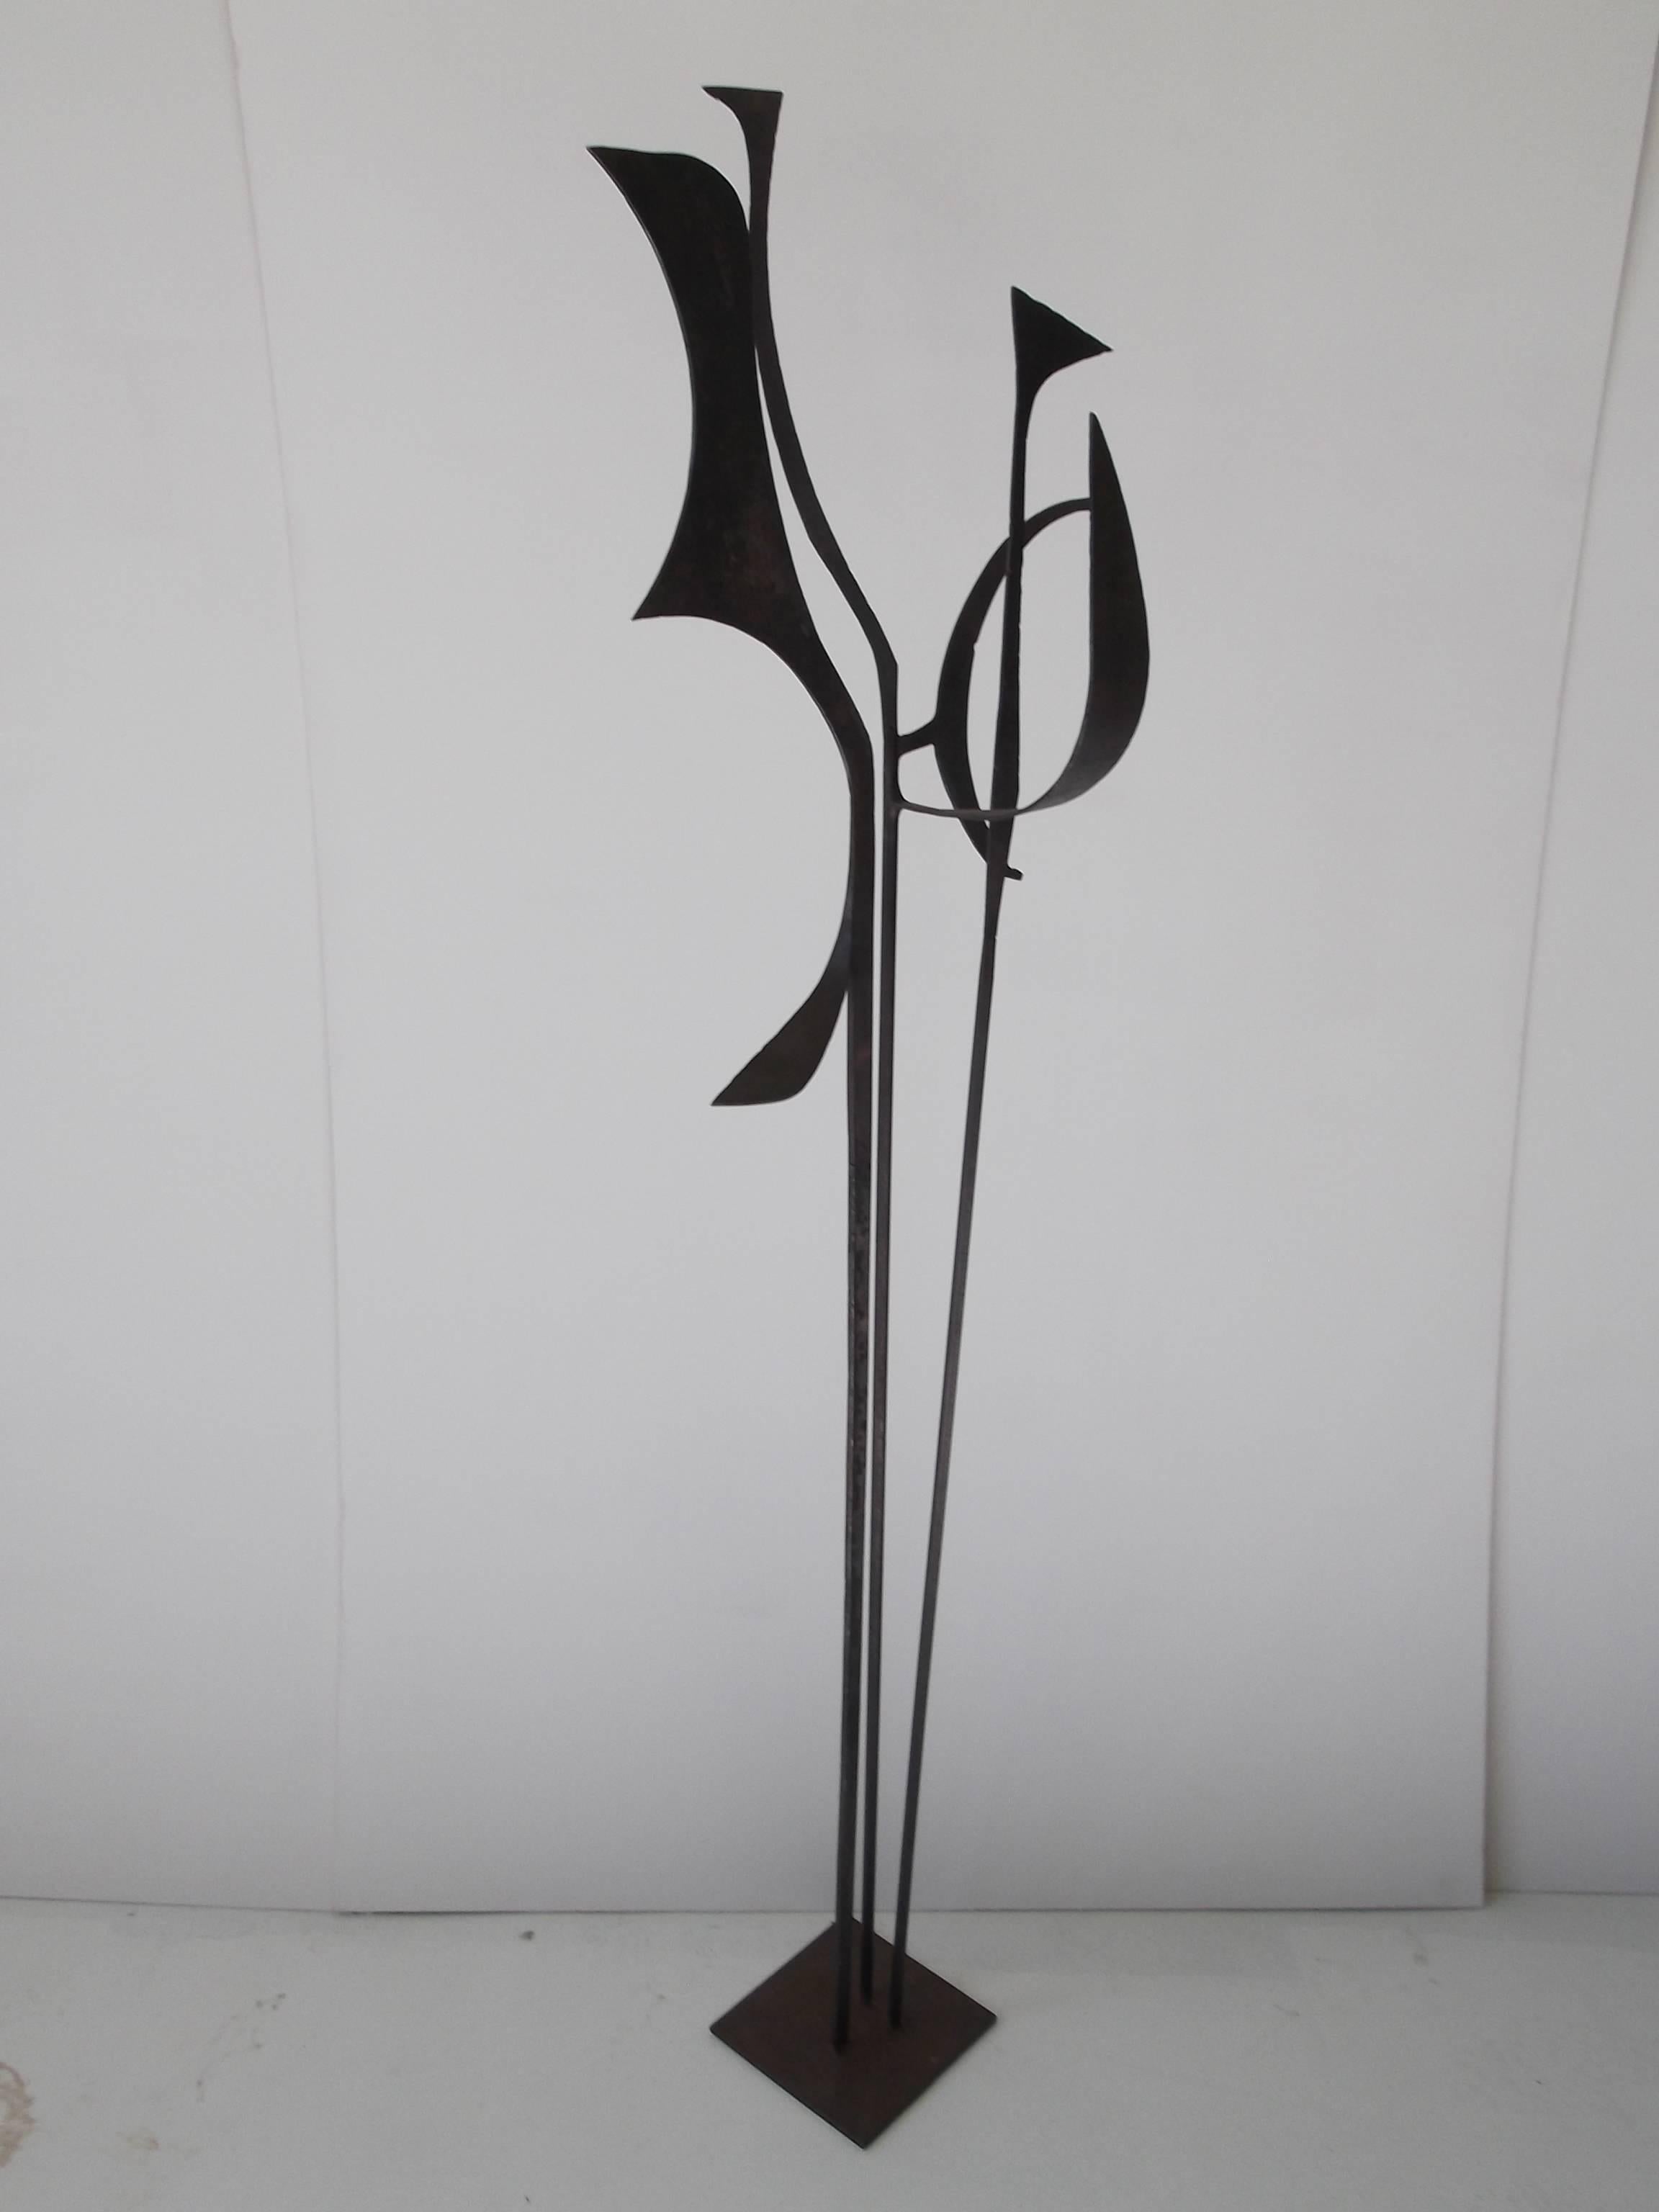 This is a dramatic modernist steel sculpture, made by well listed Oklahoma artist, Jay J. McVicker. It is a nice vertical piece that won't take up a lot of floor space, but delivers the wow! Standing 5.5 feet tall. It is artist singed to base with